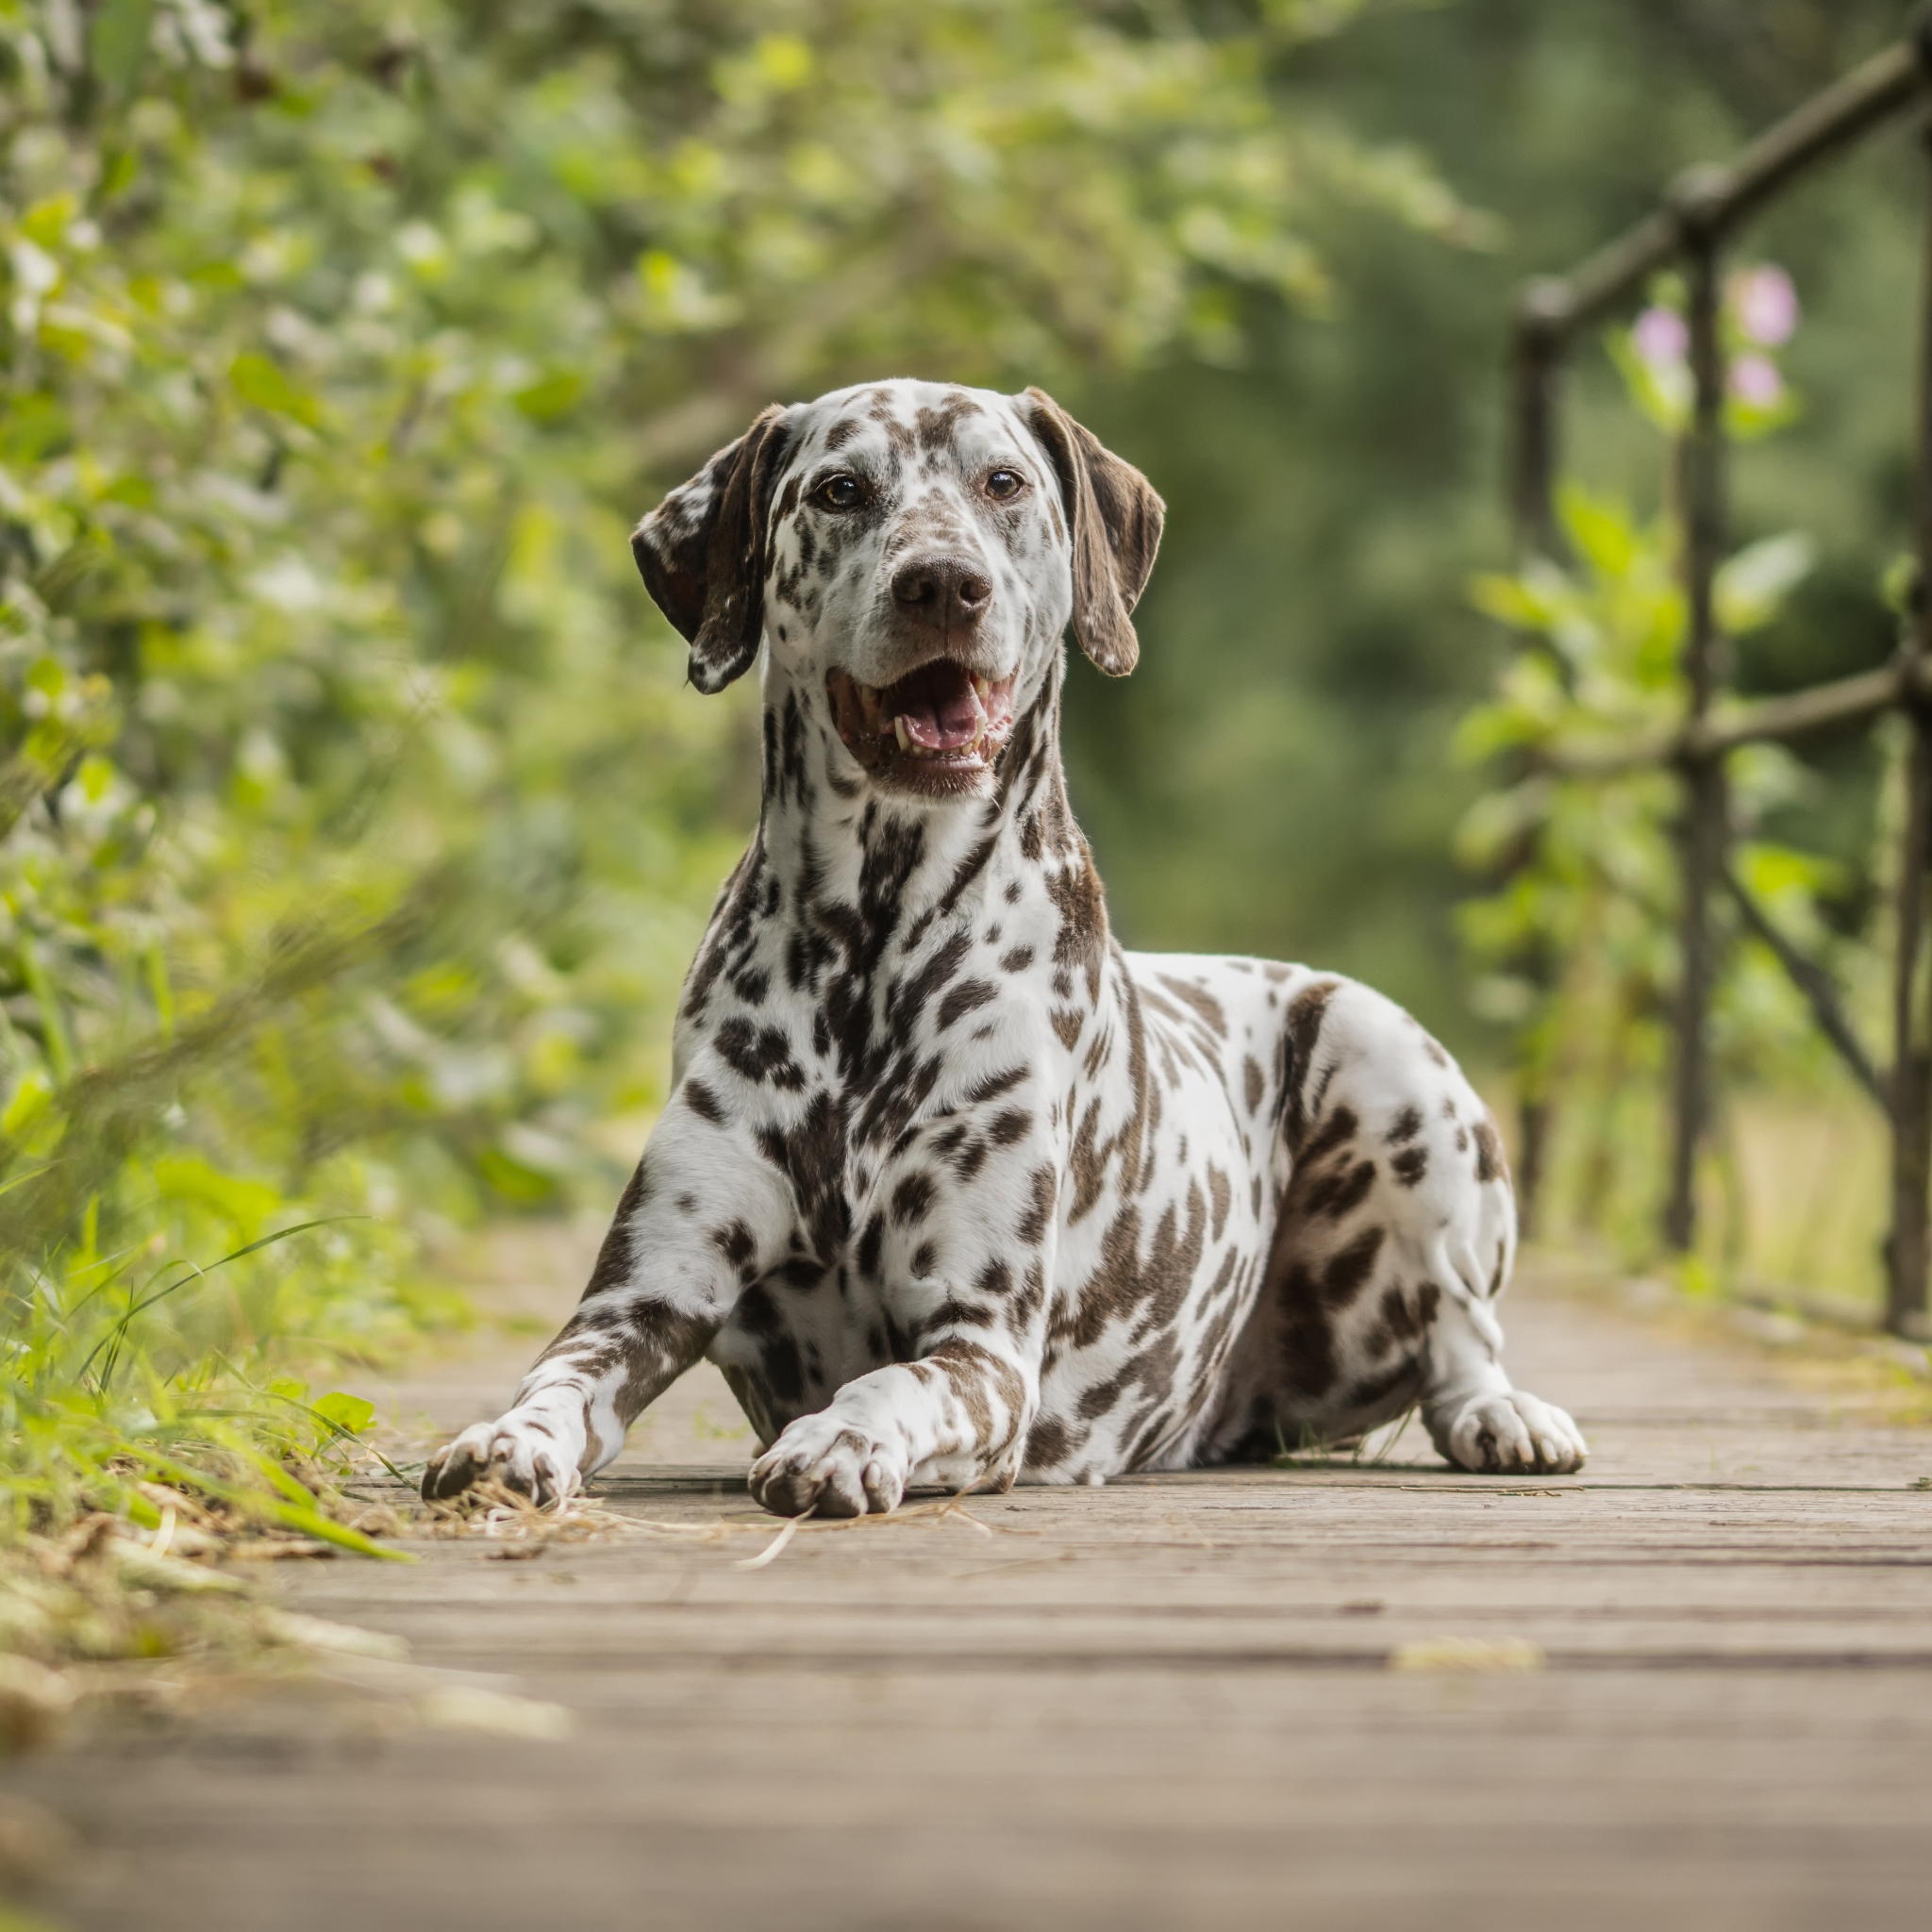 Liver-spotted Dalmatian